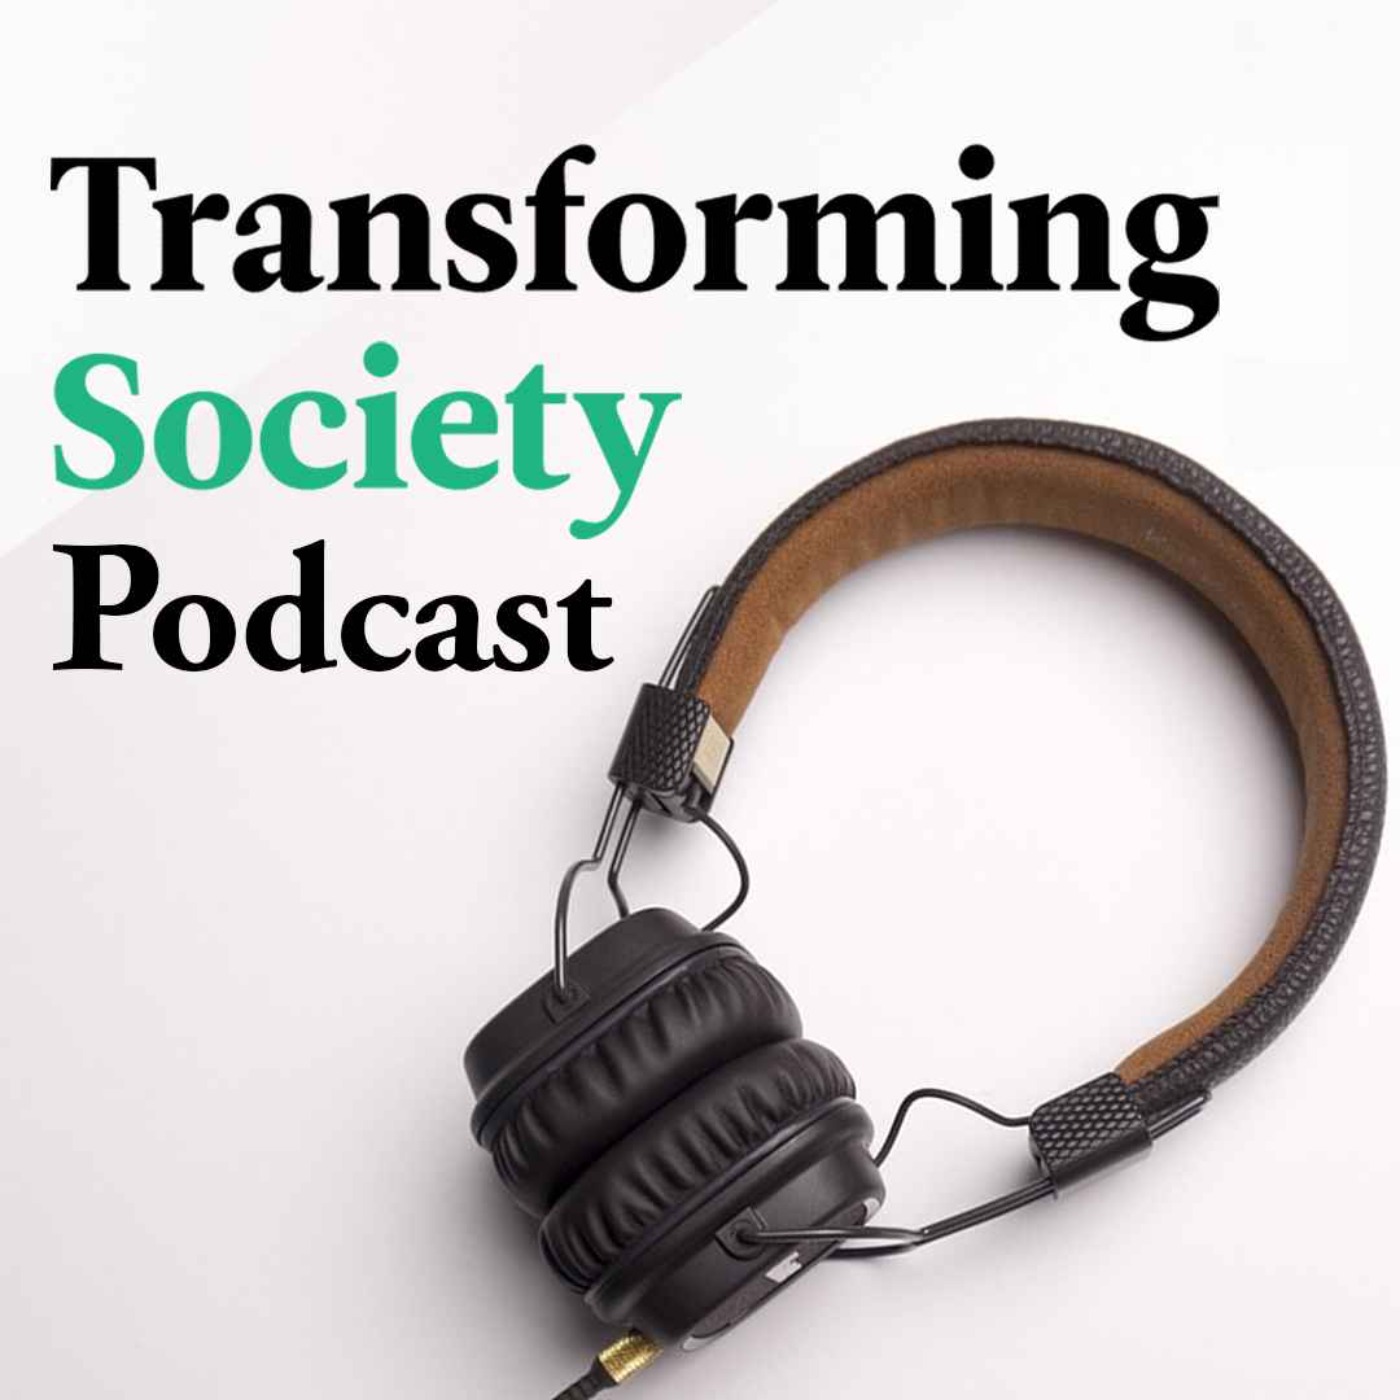 Welcome to the Transforming Society podcast